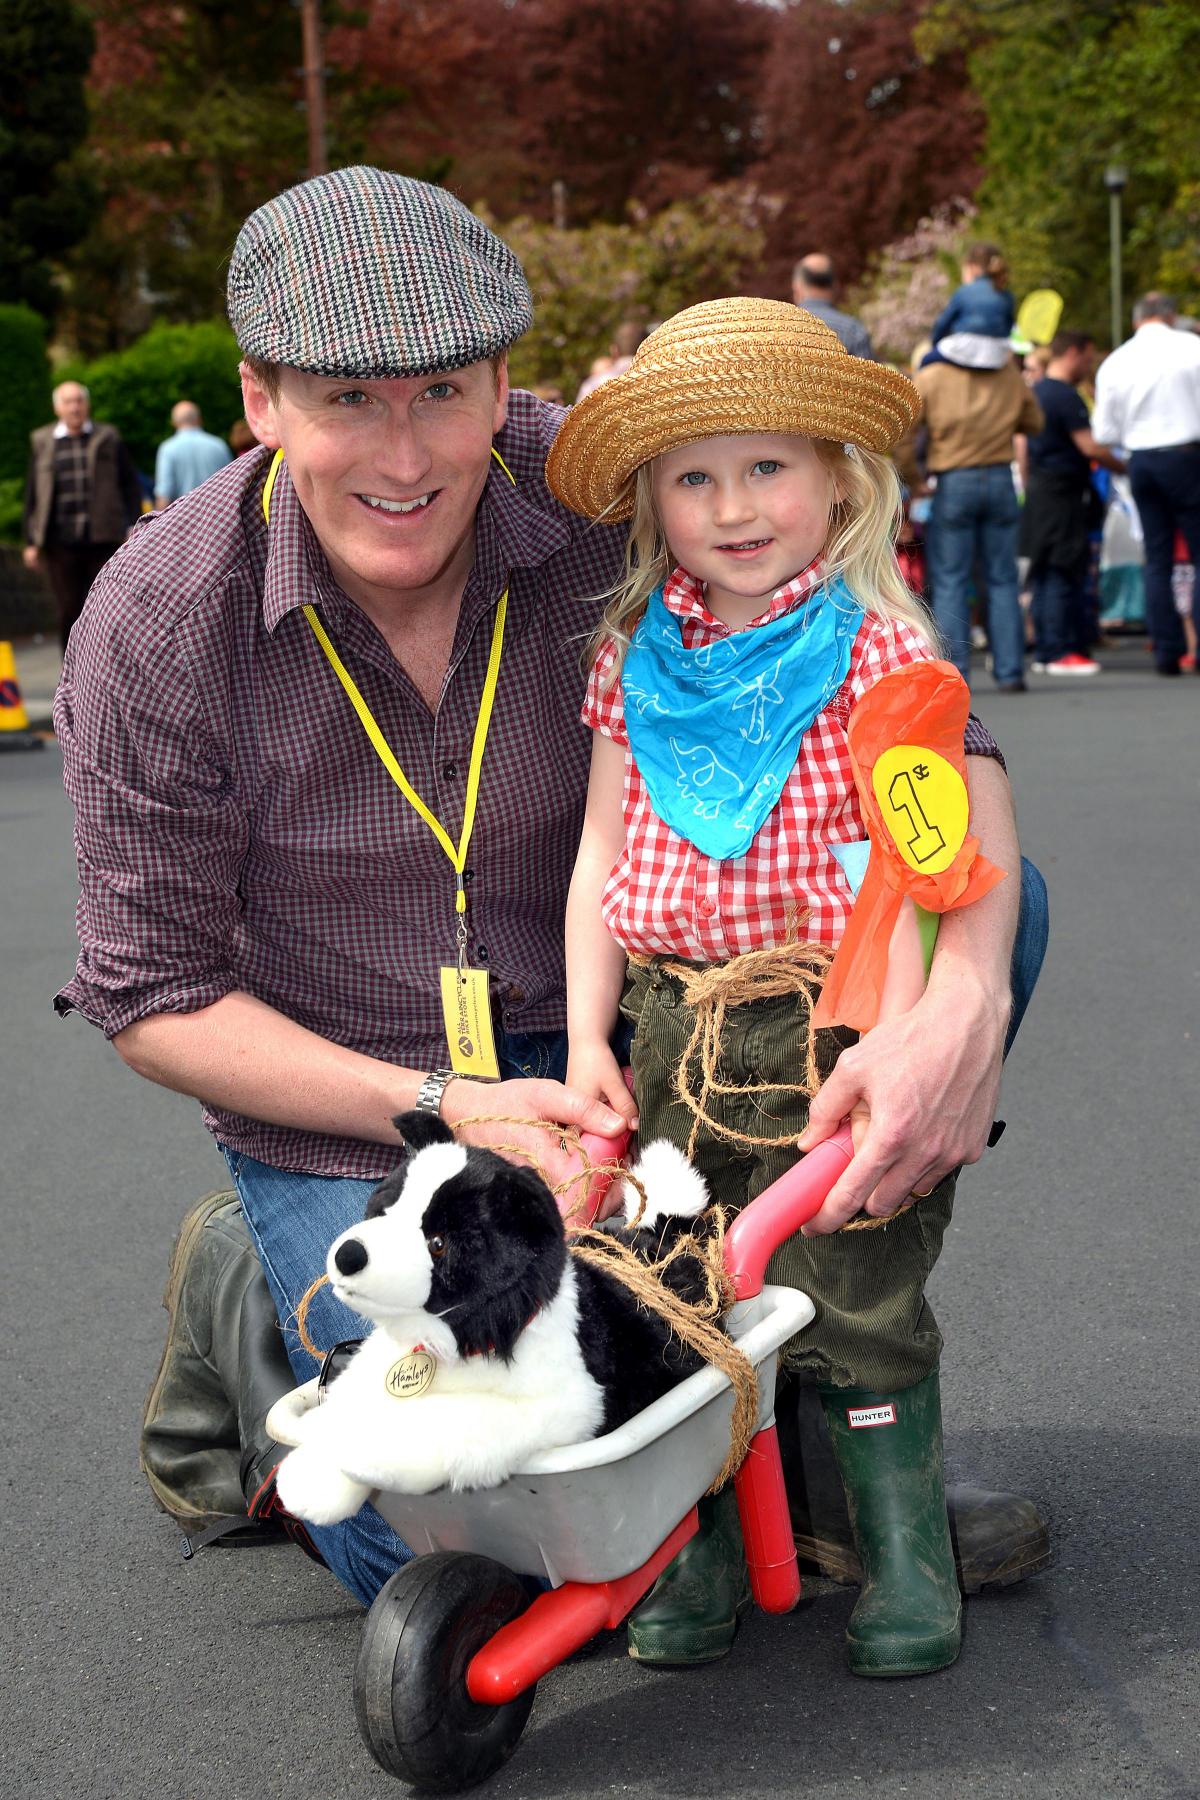 Olive Spiers, with dad Peter, from Ben Rhydding Pre-School